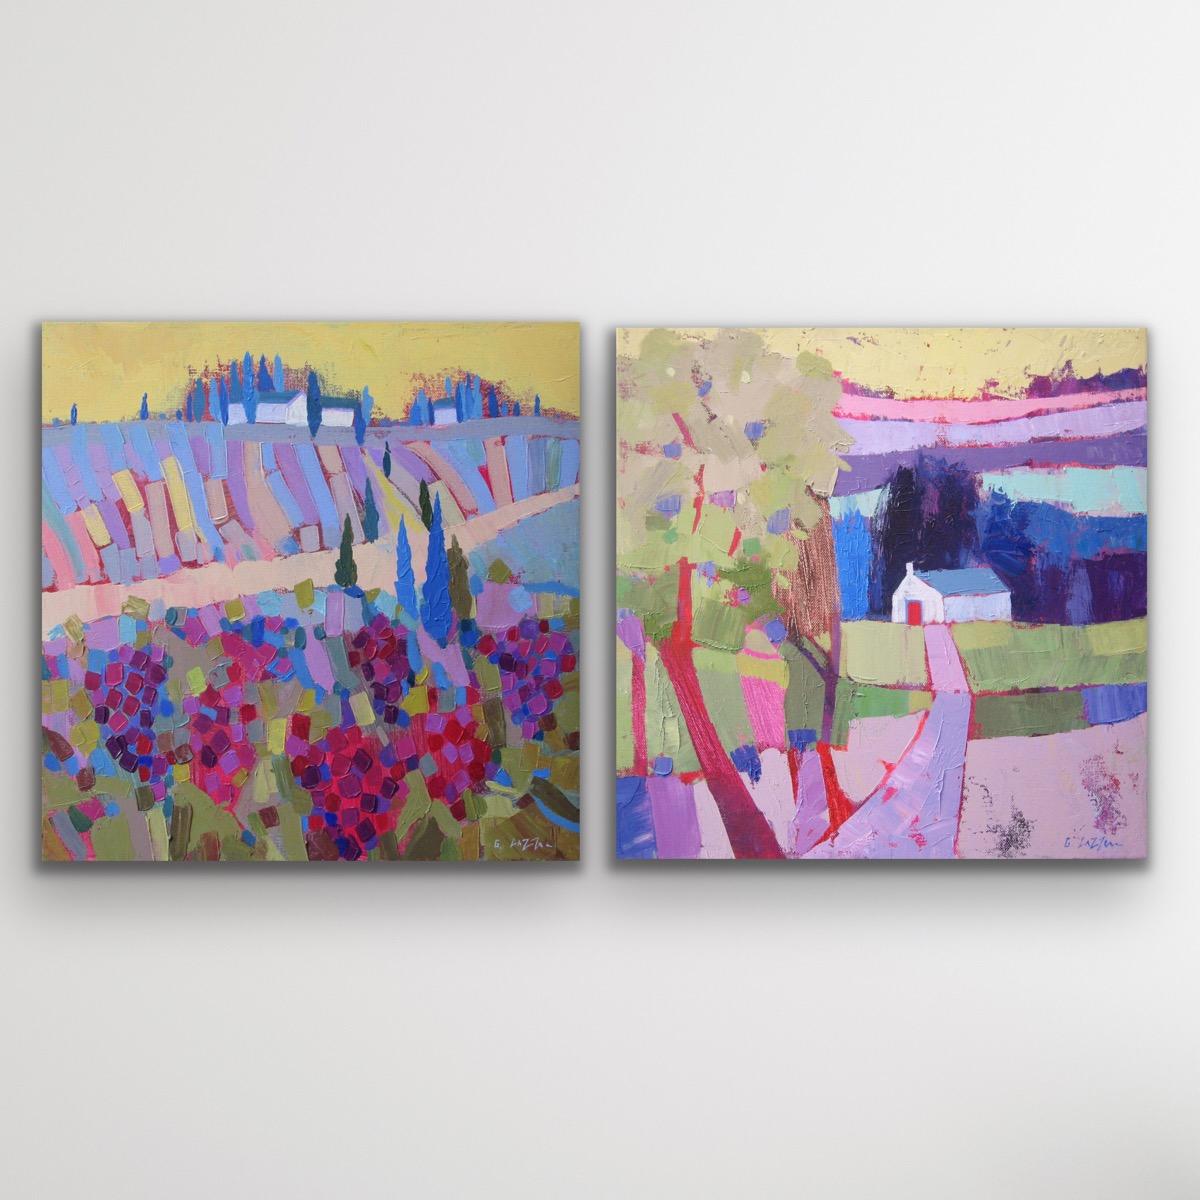 Giuliana Lazzerini Abstract Painting - Vineyards Tuscany and Cottage Paths Diptych